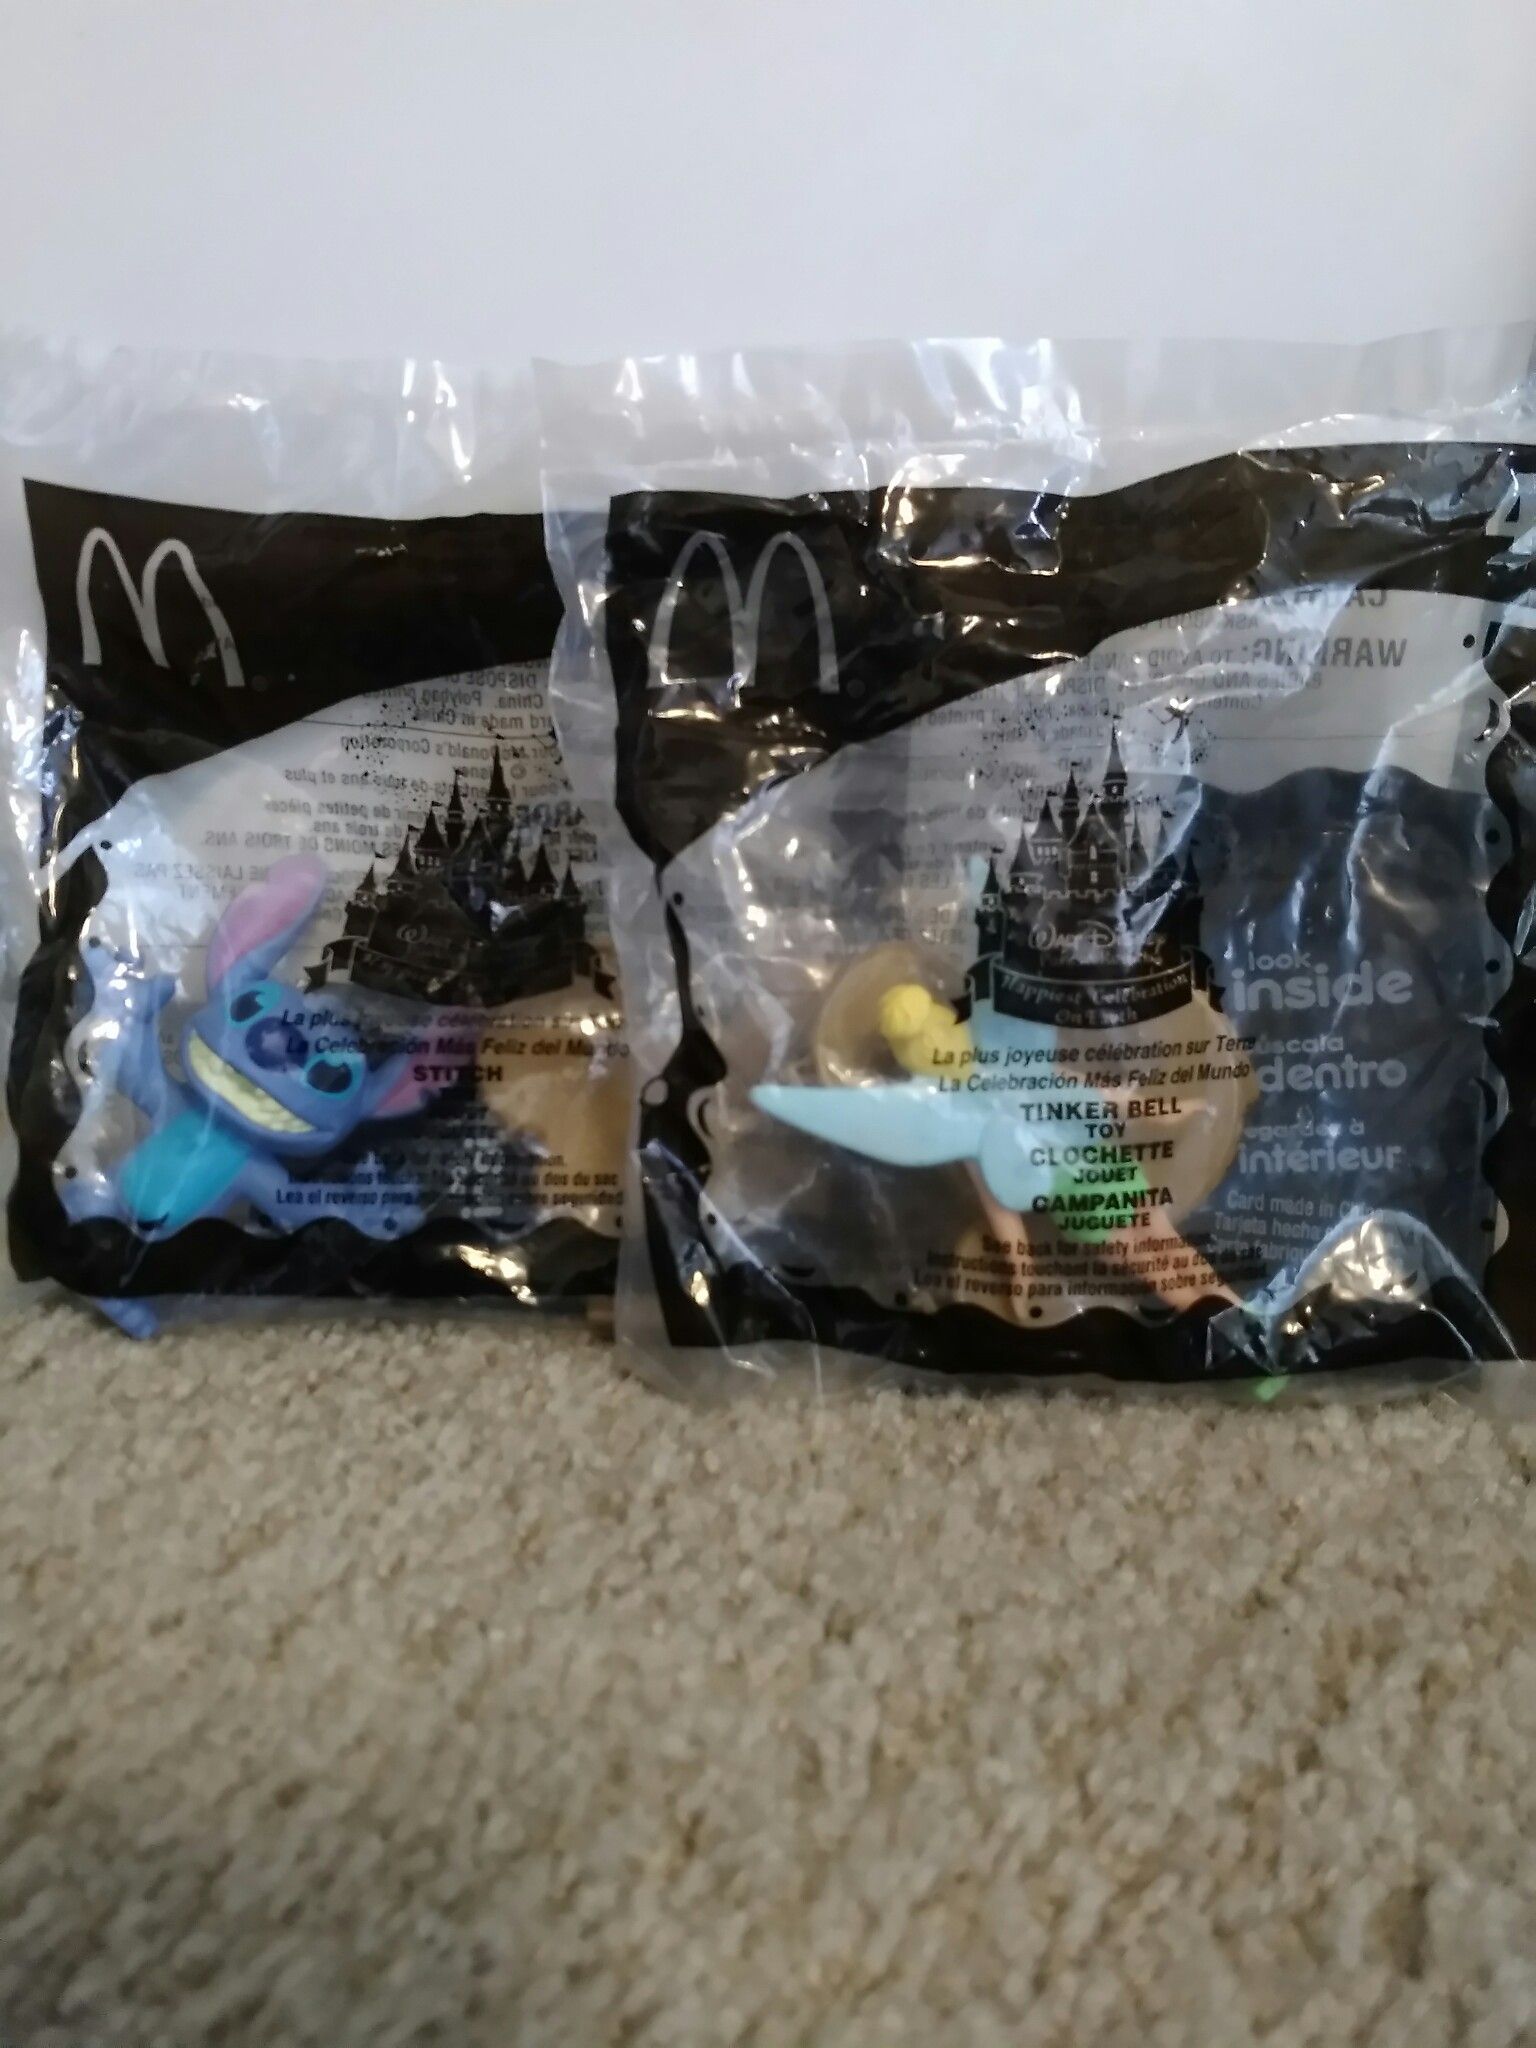 McDonalds Happy Meal Walt Disney Happiest Celebration on Earth Tinker Bell and Stitch